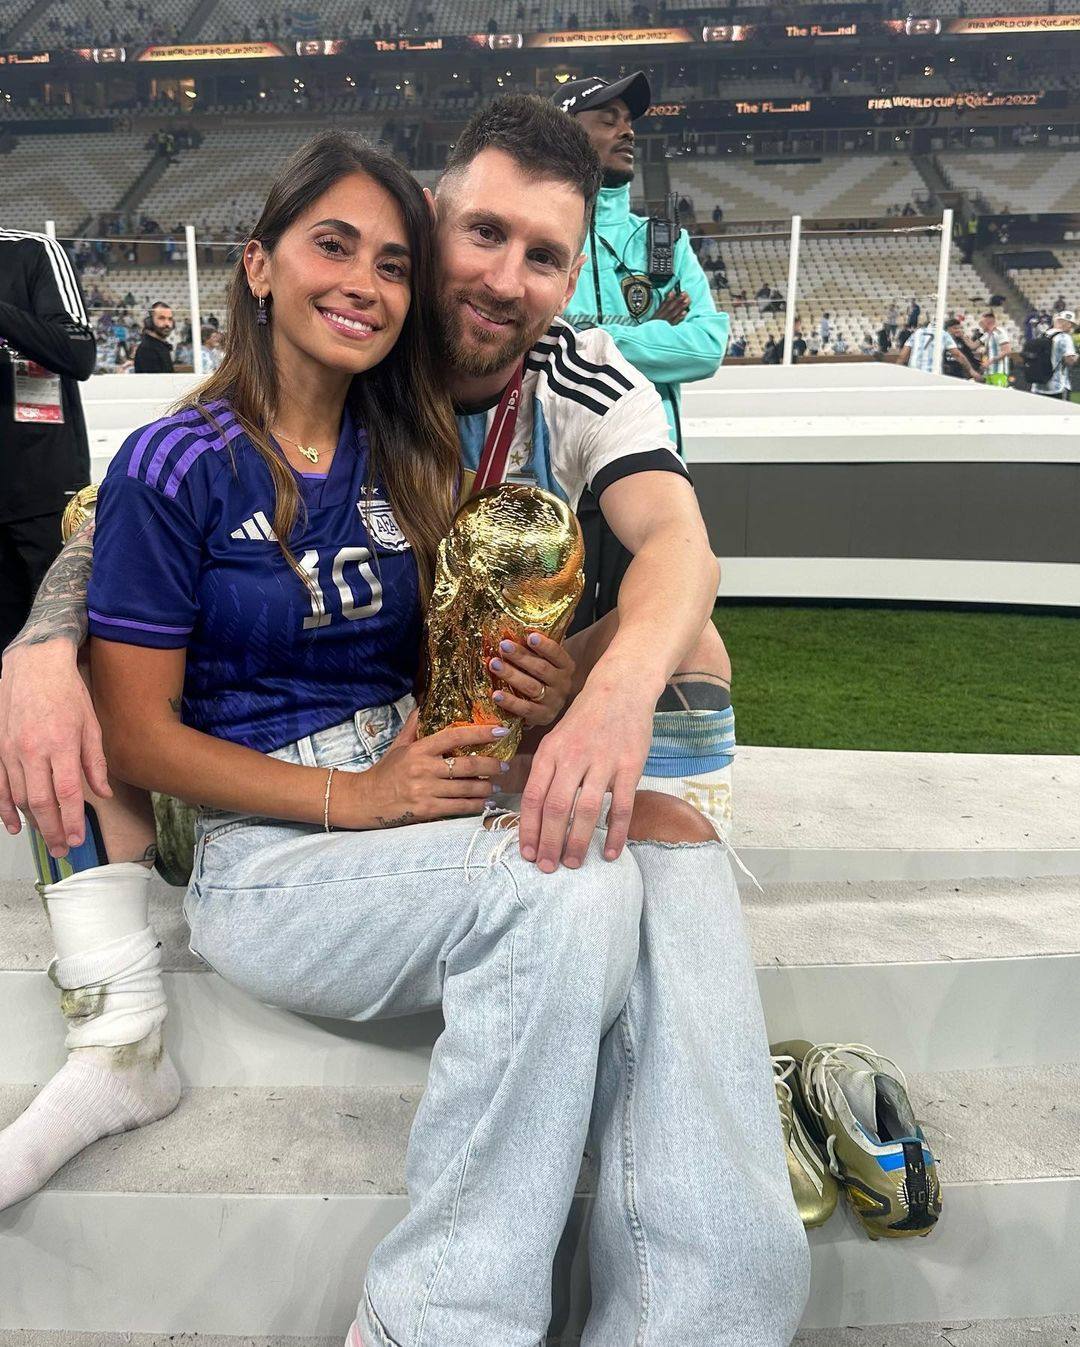 What do we know about Lionel Messi’s wife Antonela Roccuzzo? Photo: @Roccuzzo/Instagram